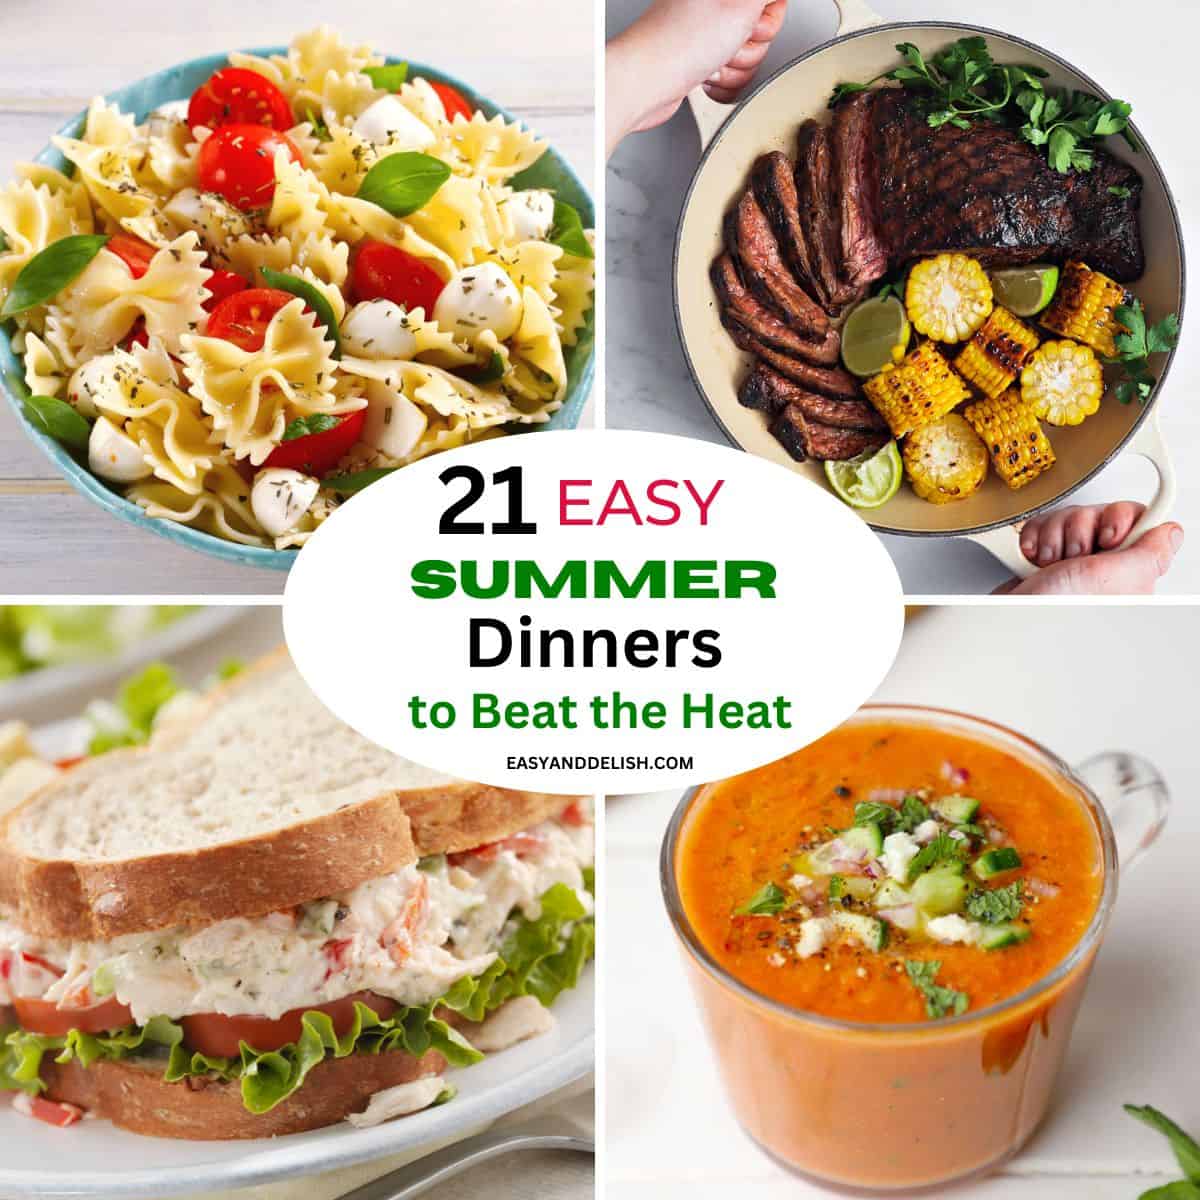 Four image-collage showing summer dinner ideas, including pasta salad, grilled steak, cold chicken salad sandwich, and gazpacho.